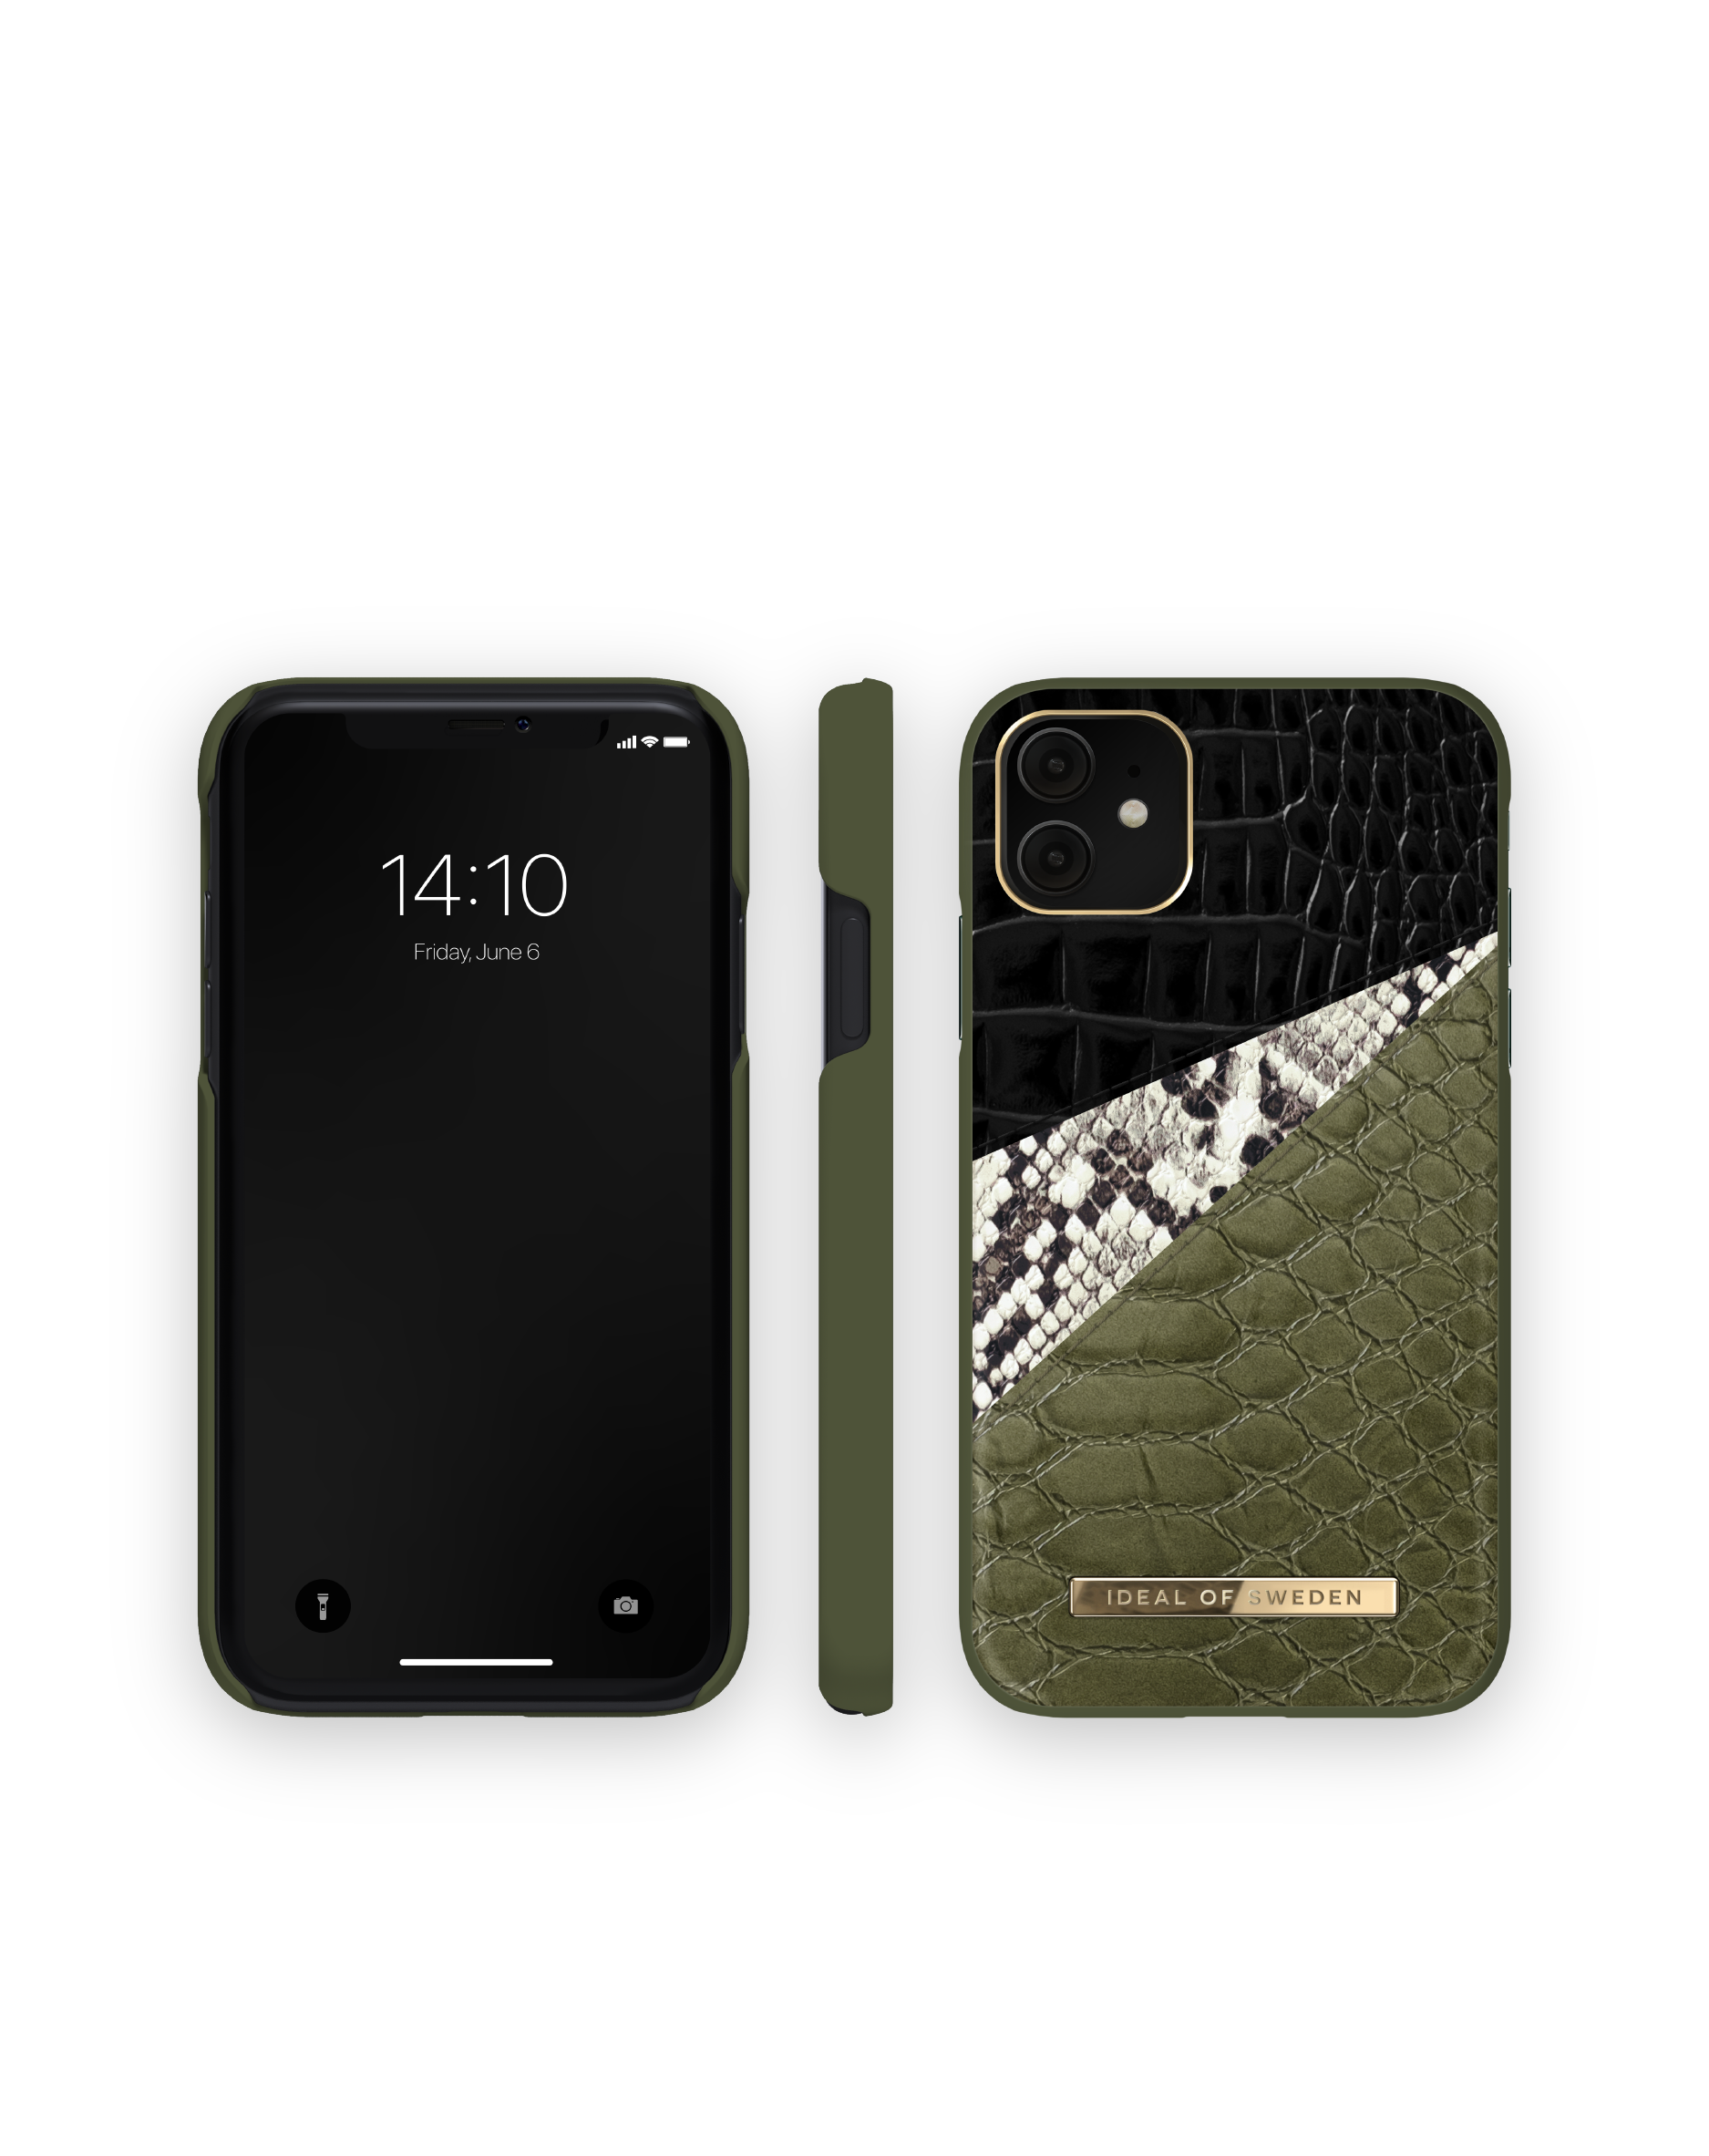 IDEAL Snake XR, SWEDEN iPhone 11, iPhone Hypnotic Backcover, IDACAW20-1961-224, Apple, OF